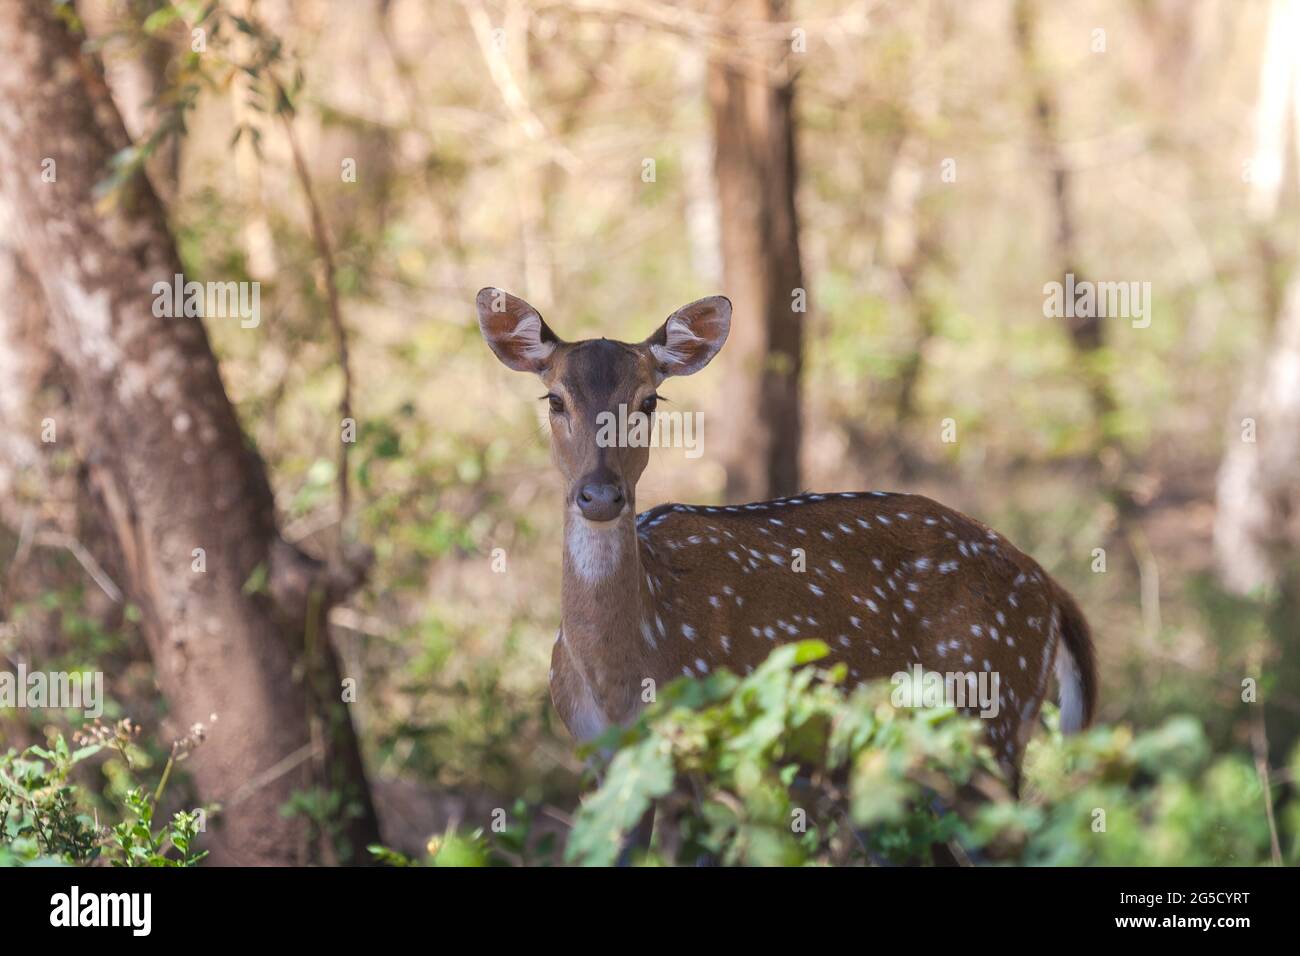 Spotted Deer (also known as Chital deer and Axis deer) in its natural environment in Nagarhole Forest Reserve, Karnataka, India Stock Photo